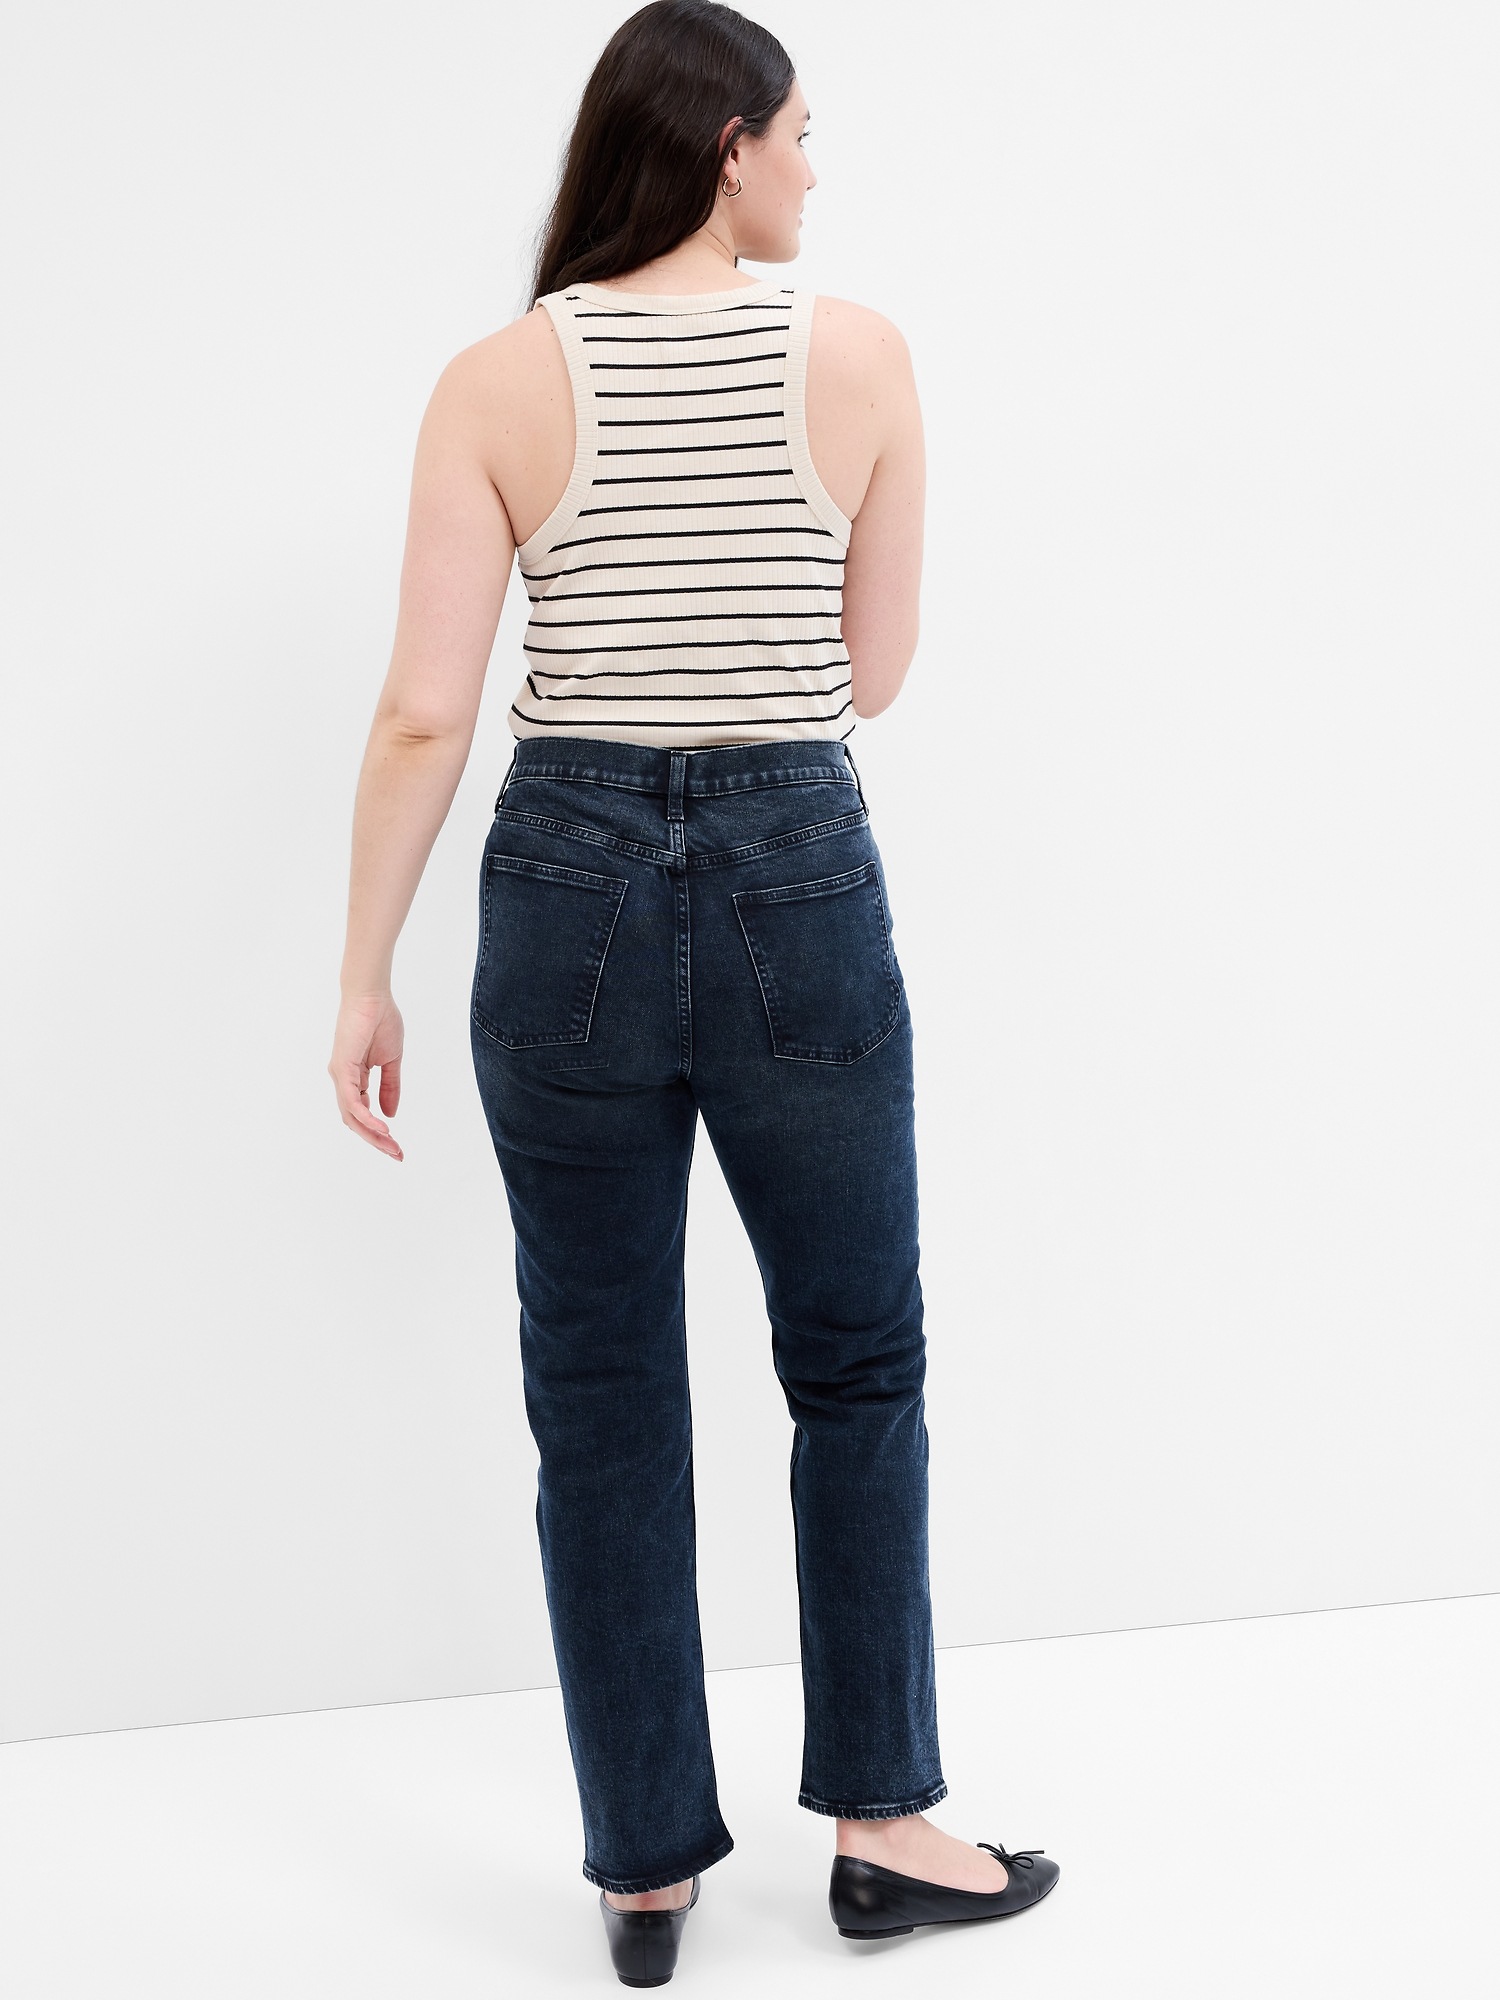 90s Original Straight Jeans with Washwell